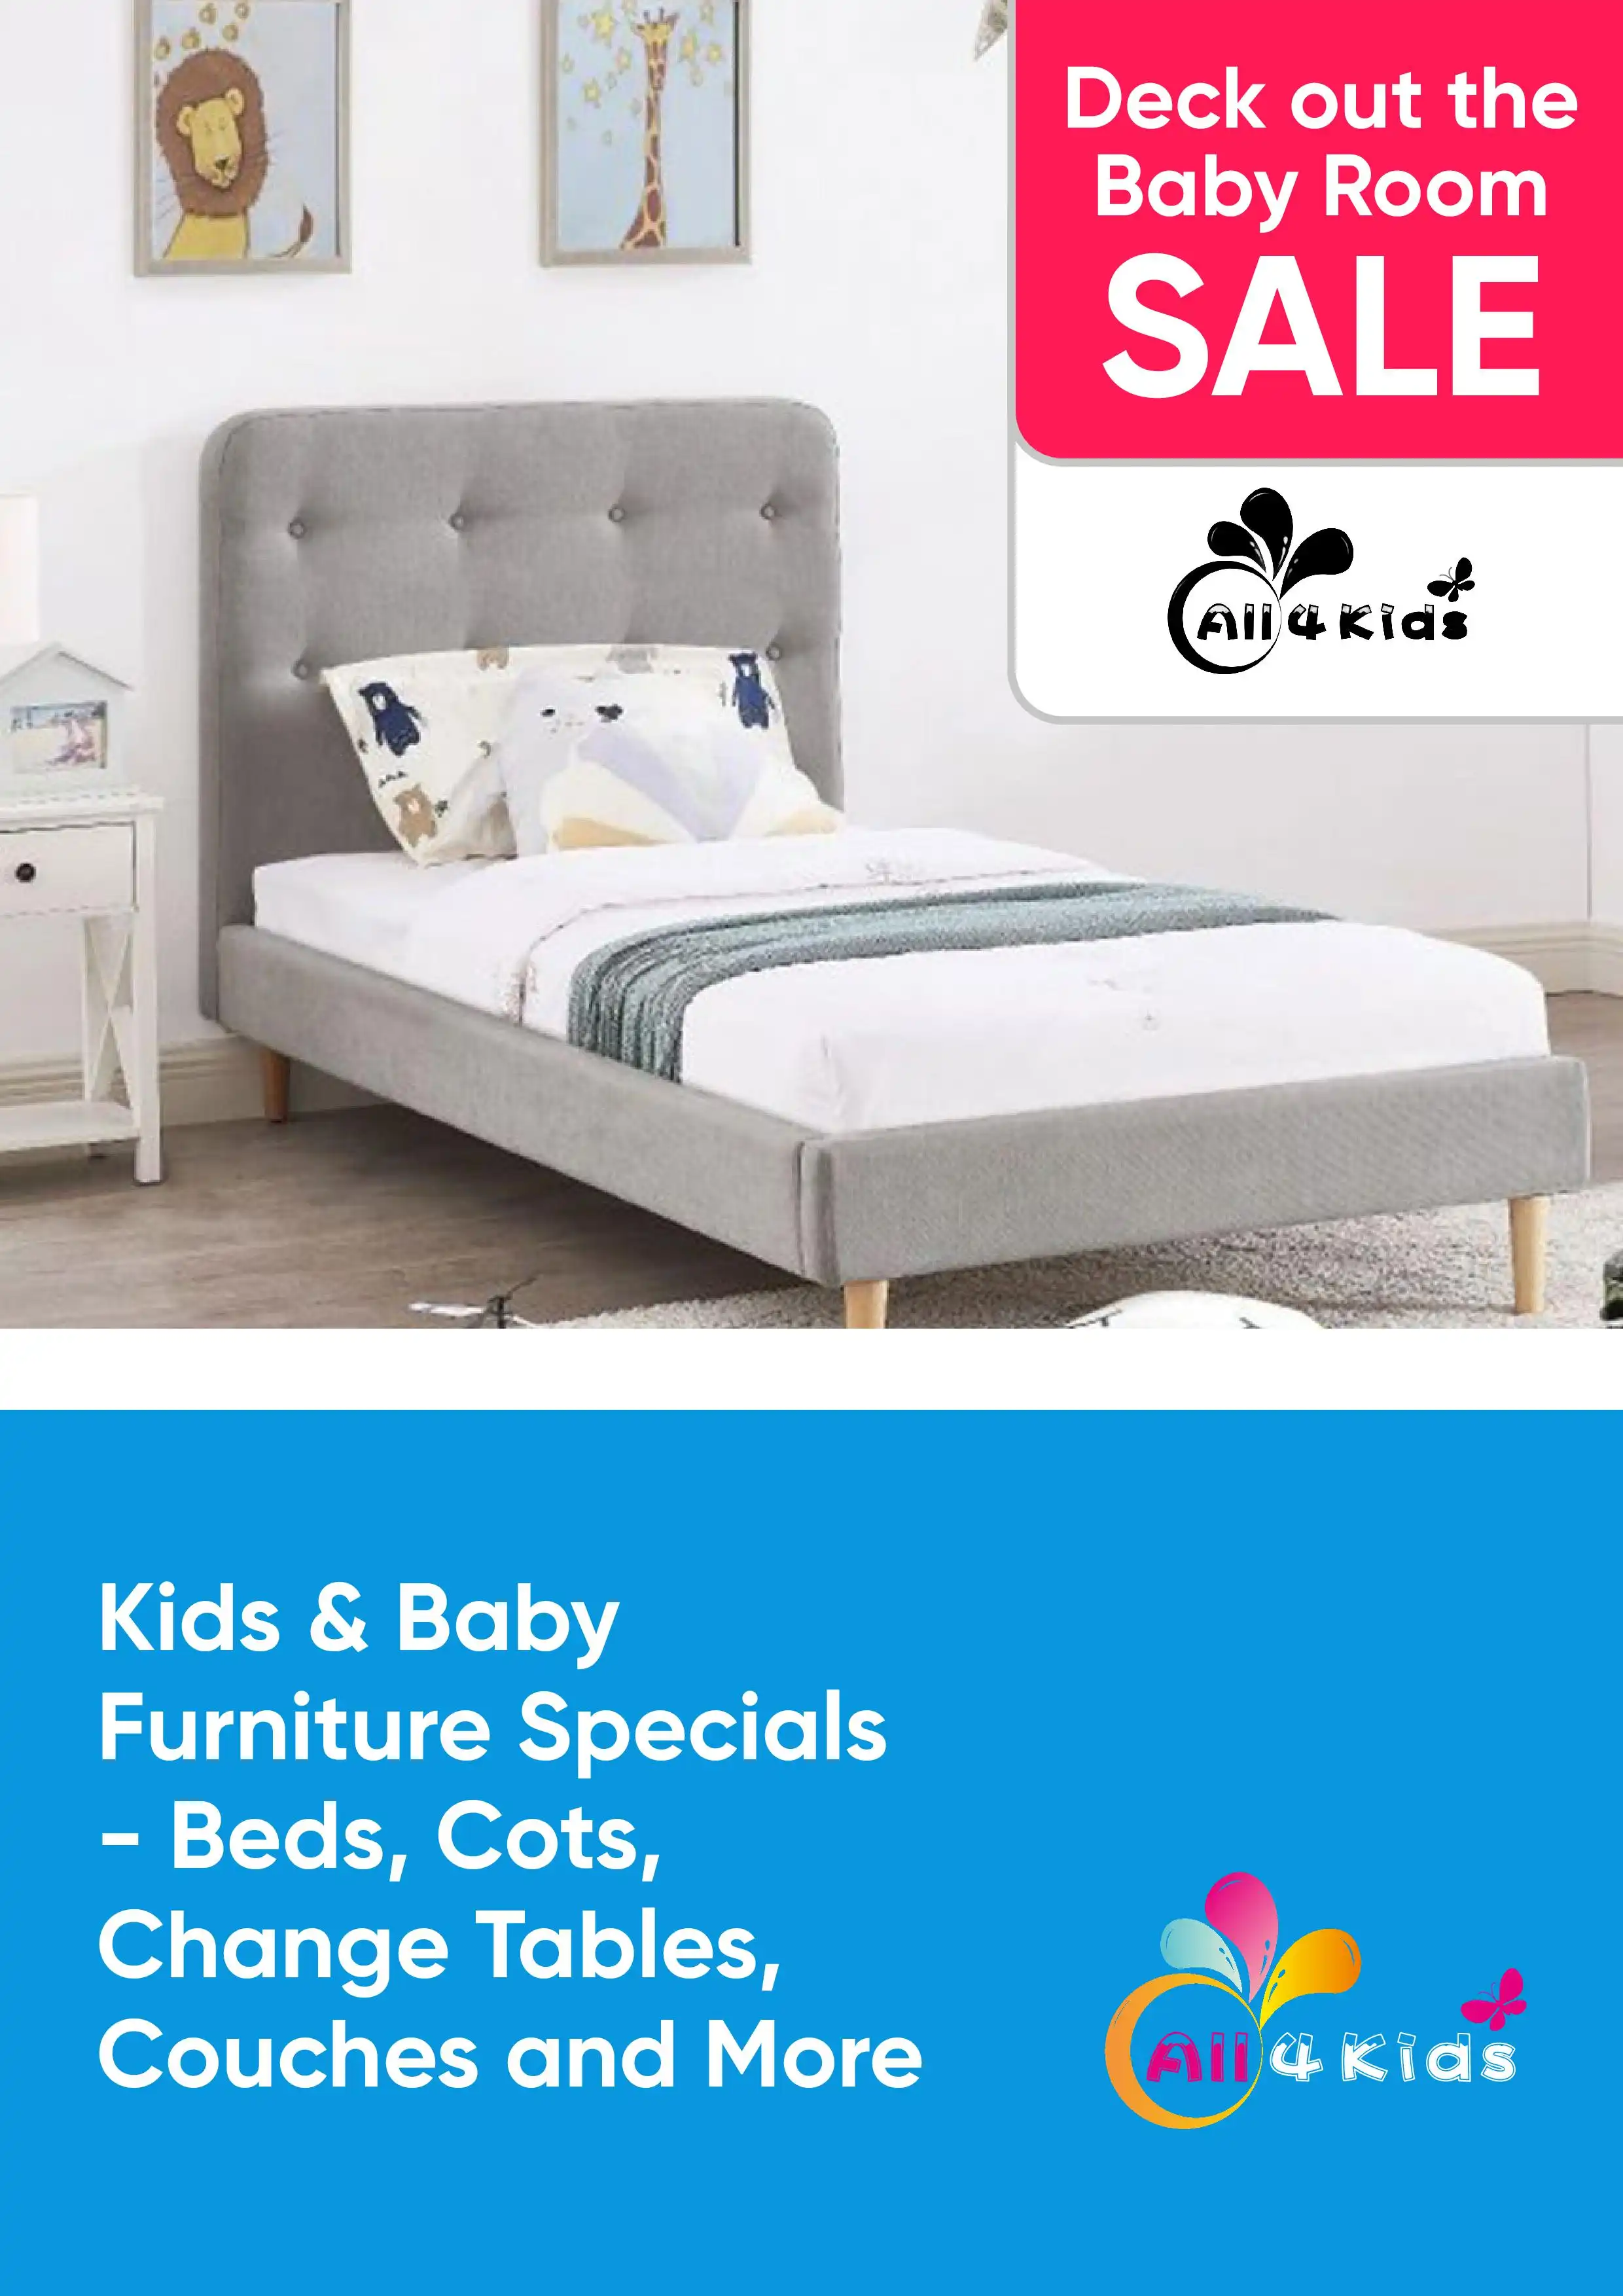 Kids & Baby Furniture Specials - Shop Beds, Cots, Change Tables, Couches and More